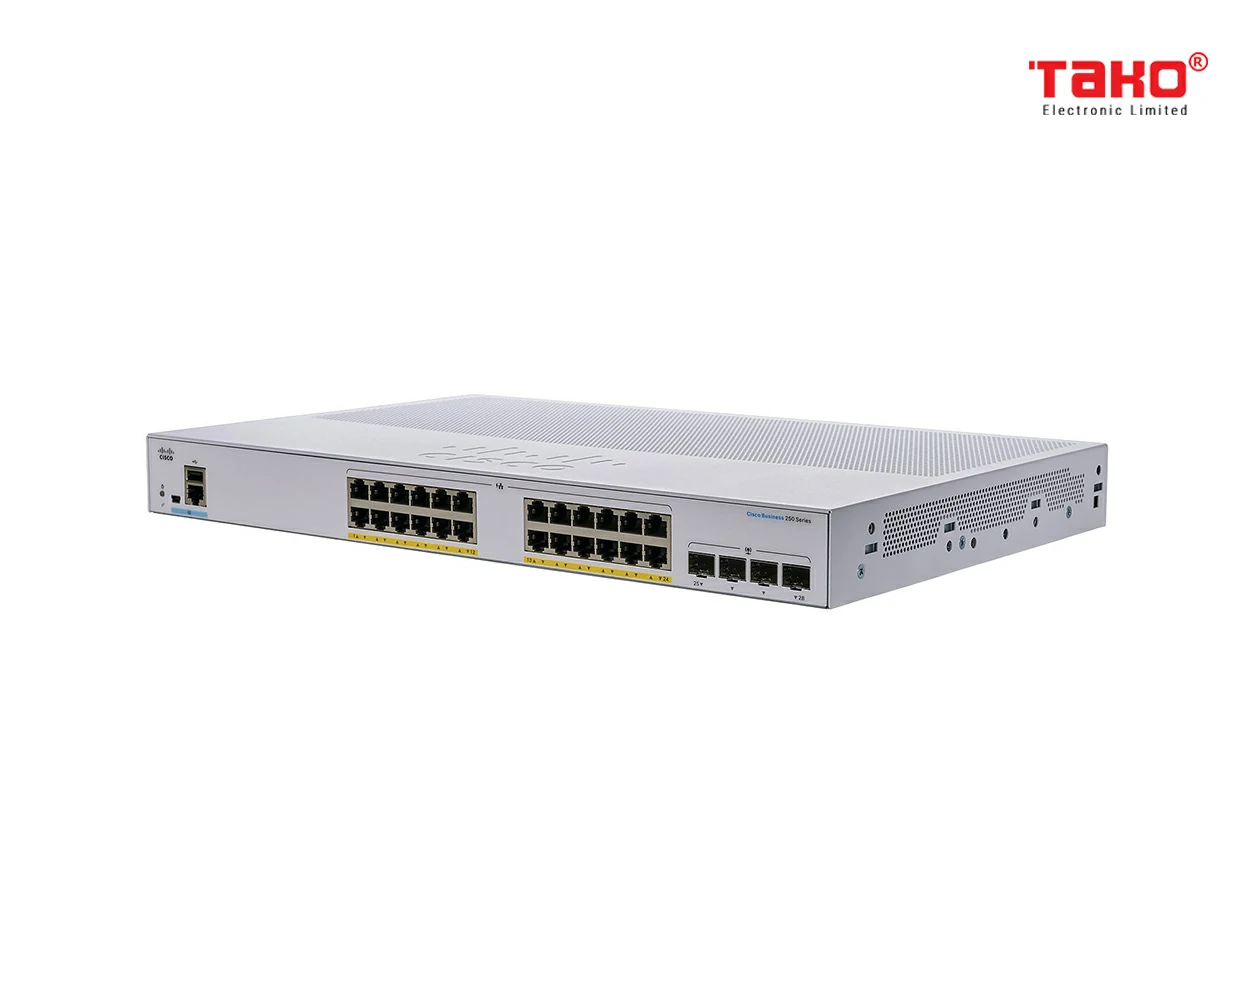 Cisco CBS250-24FP-4X 24 port 10/100/1000 Mbps PoE Layer 2 manageable web switch 4 x 10 Gbps SFP slots 2